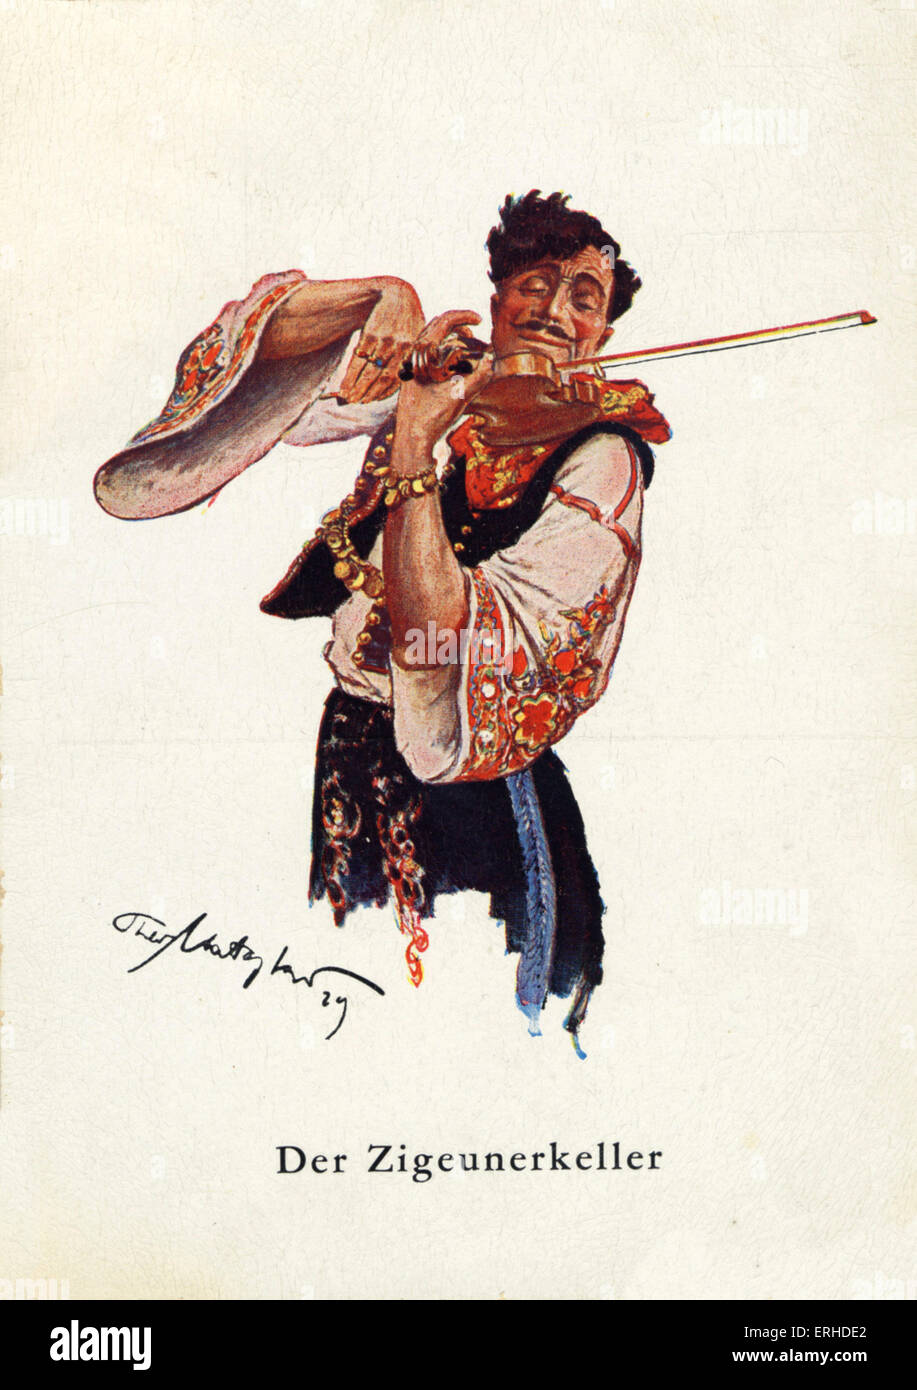 Illustration of male gypsy playing the violin in traditional costume. Stock Photo